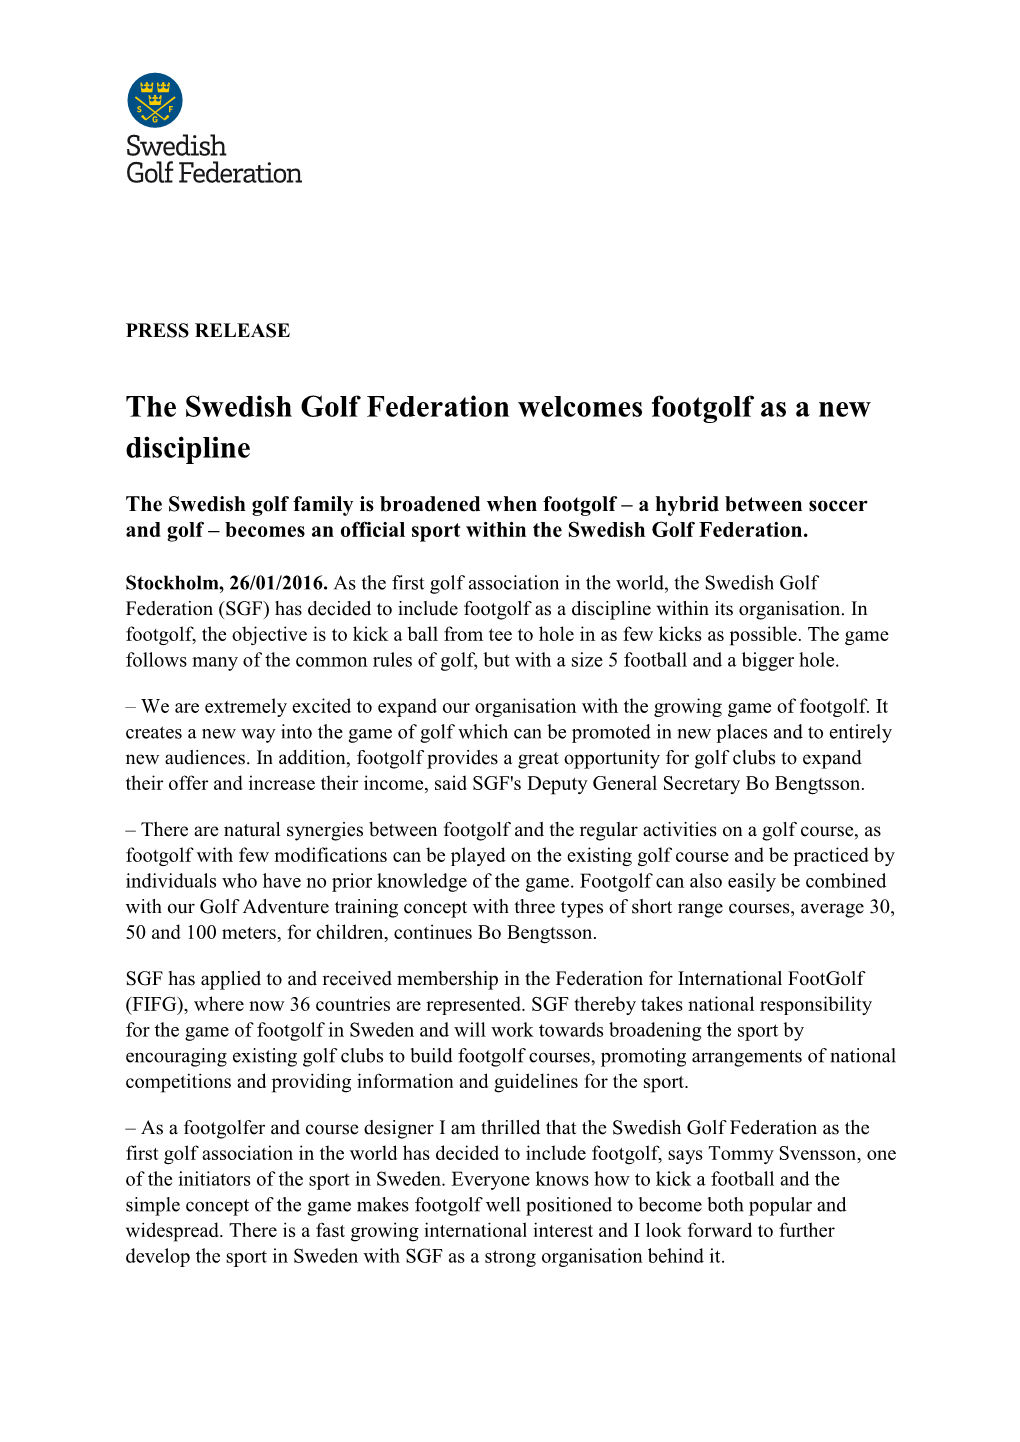 The Swedish Golf Federation Welcomes Footgolf As a New Discipline